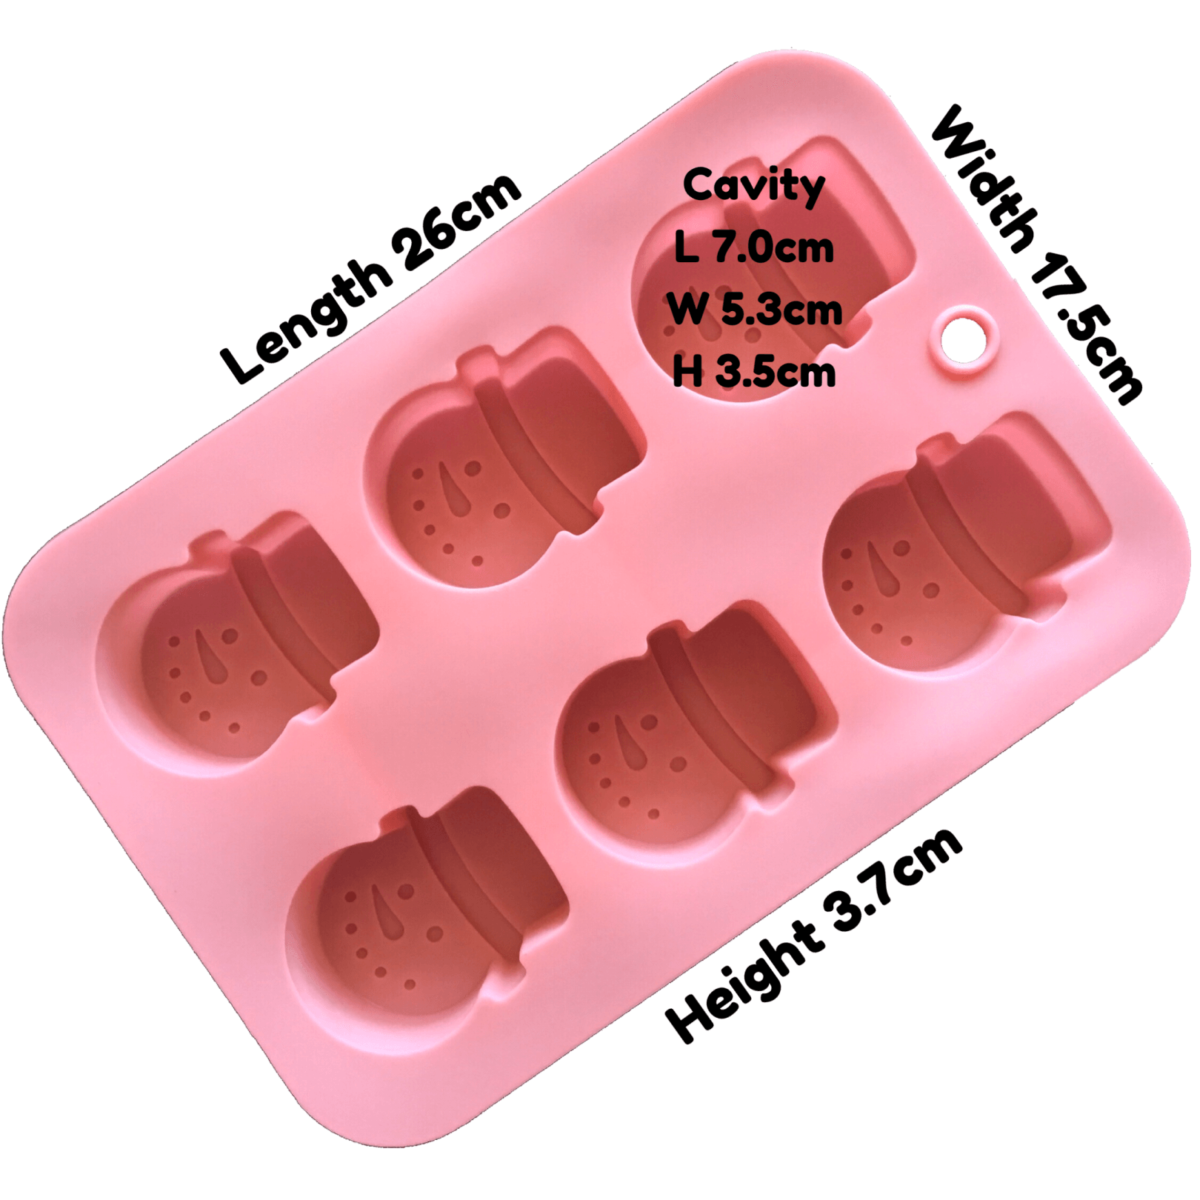 written dimensions of pink six cavity silicone mould with identical snowman head-shaped cavities